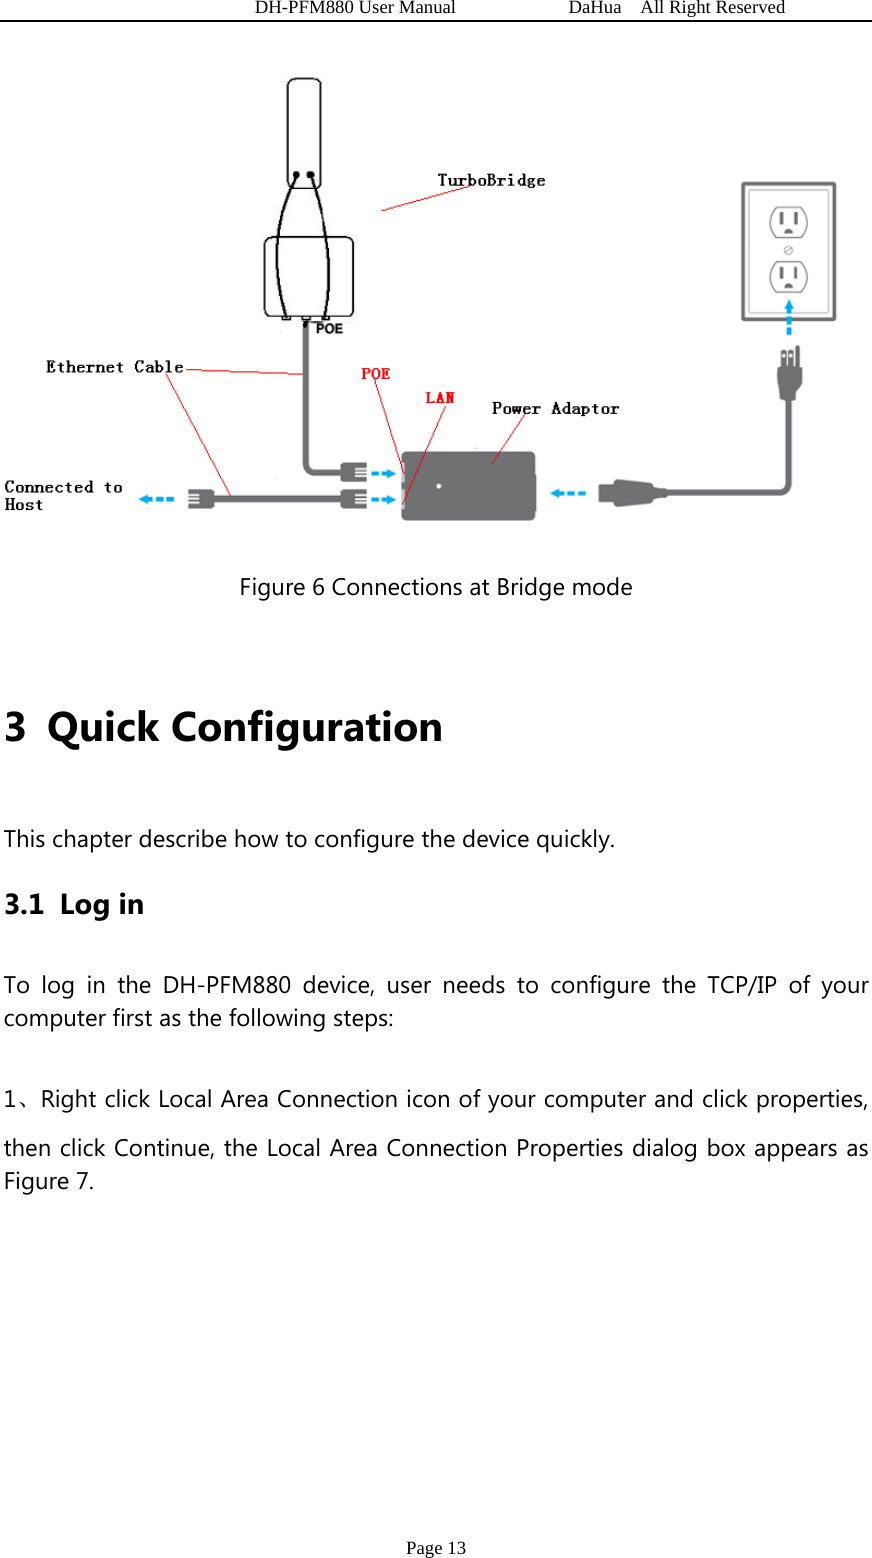   DH-PFM880 User Manual            DaHua  All Right Reserved Page 13  Figure 6 Connections at Bridge mode  3 Quick Configuration  This chapter describe how to configure the device quickly. 3.1 Log in To log in the DH-PFM880 device, user needs to configure the TCP/IP of your computer first as the following steps: 1、Right click Local Area Connection icon of your computer and click properties, then click Continue, the Local Area Connection Properties dialog box appears as Figure 7. 